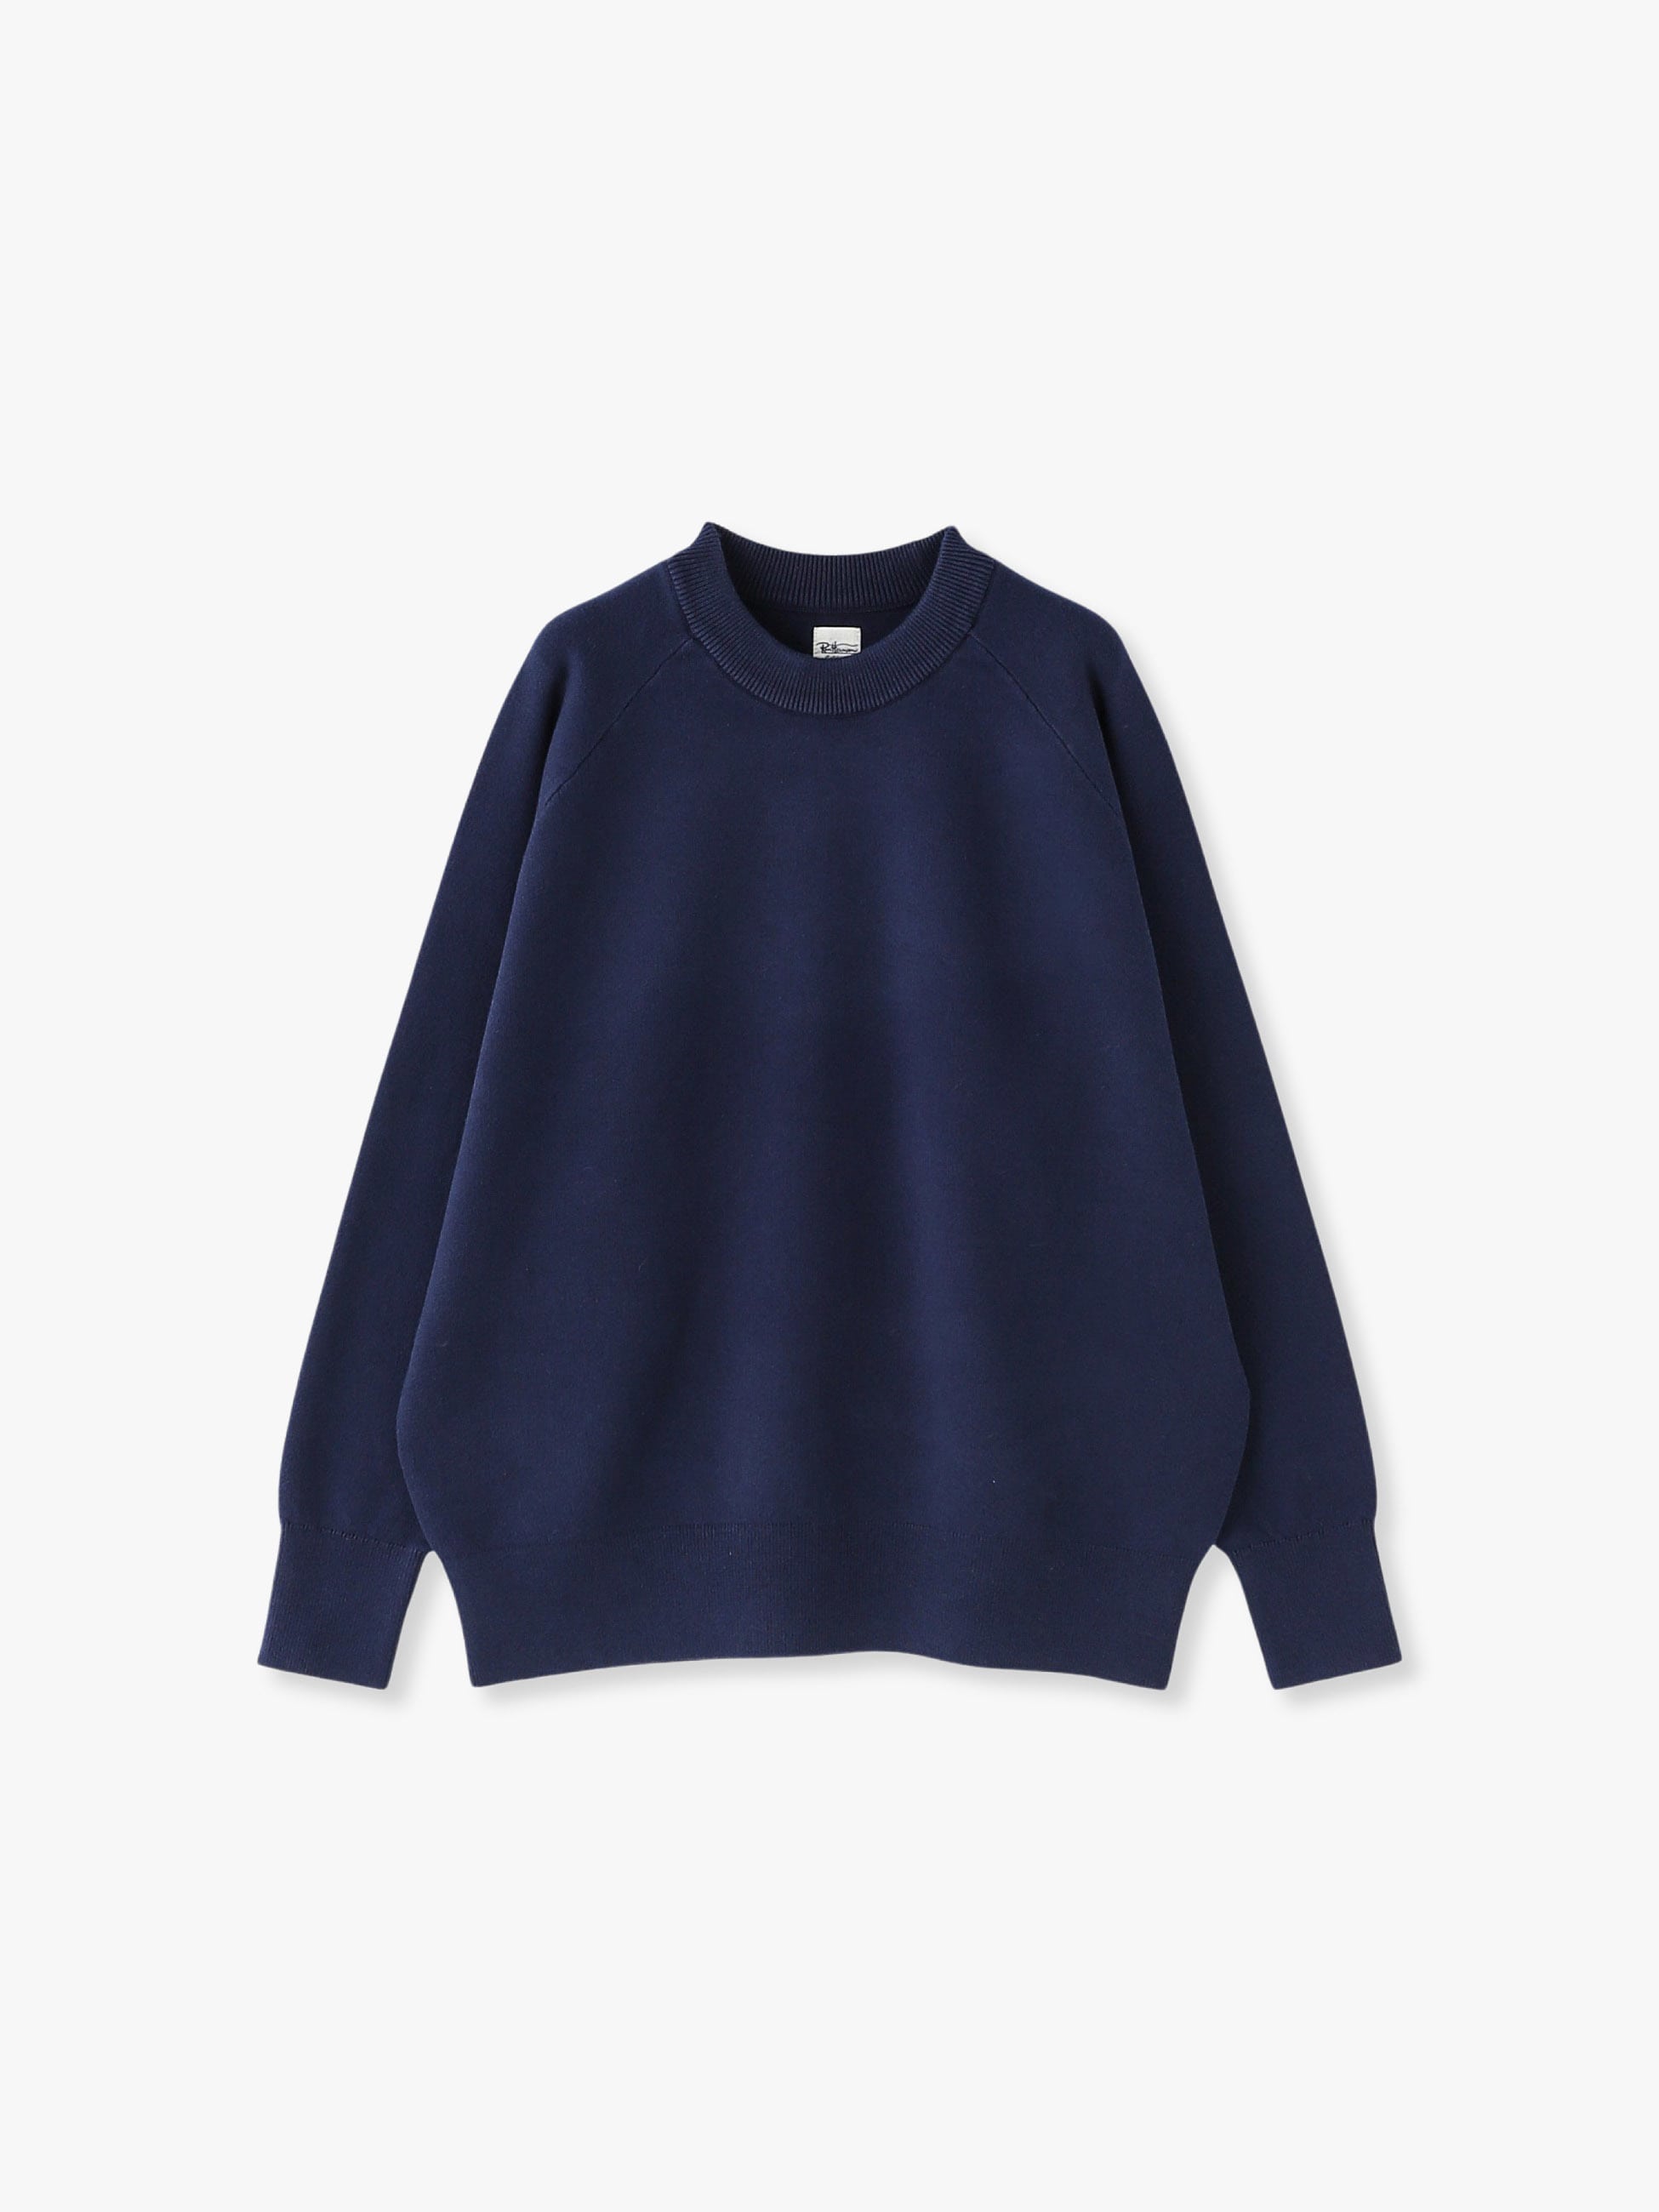 Suvin Cotton Smooth Knit Pullover 詳細画像 navy 7